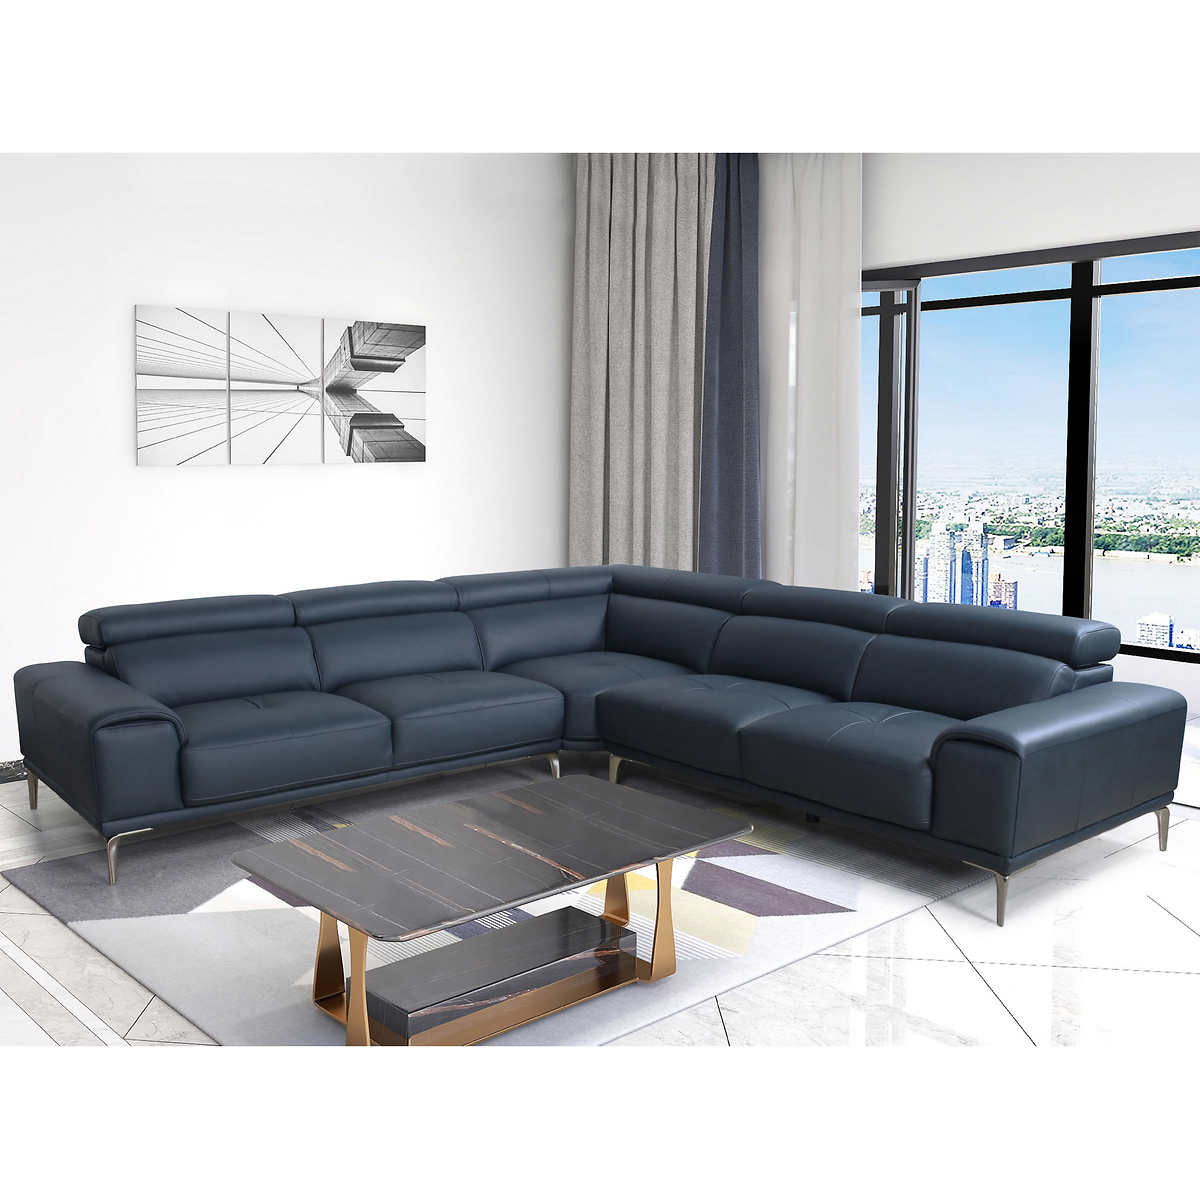 Quinton Top Grain Leather Sectional, Sectional Leather Couch